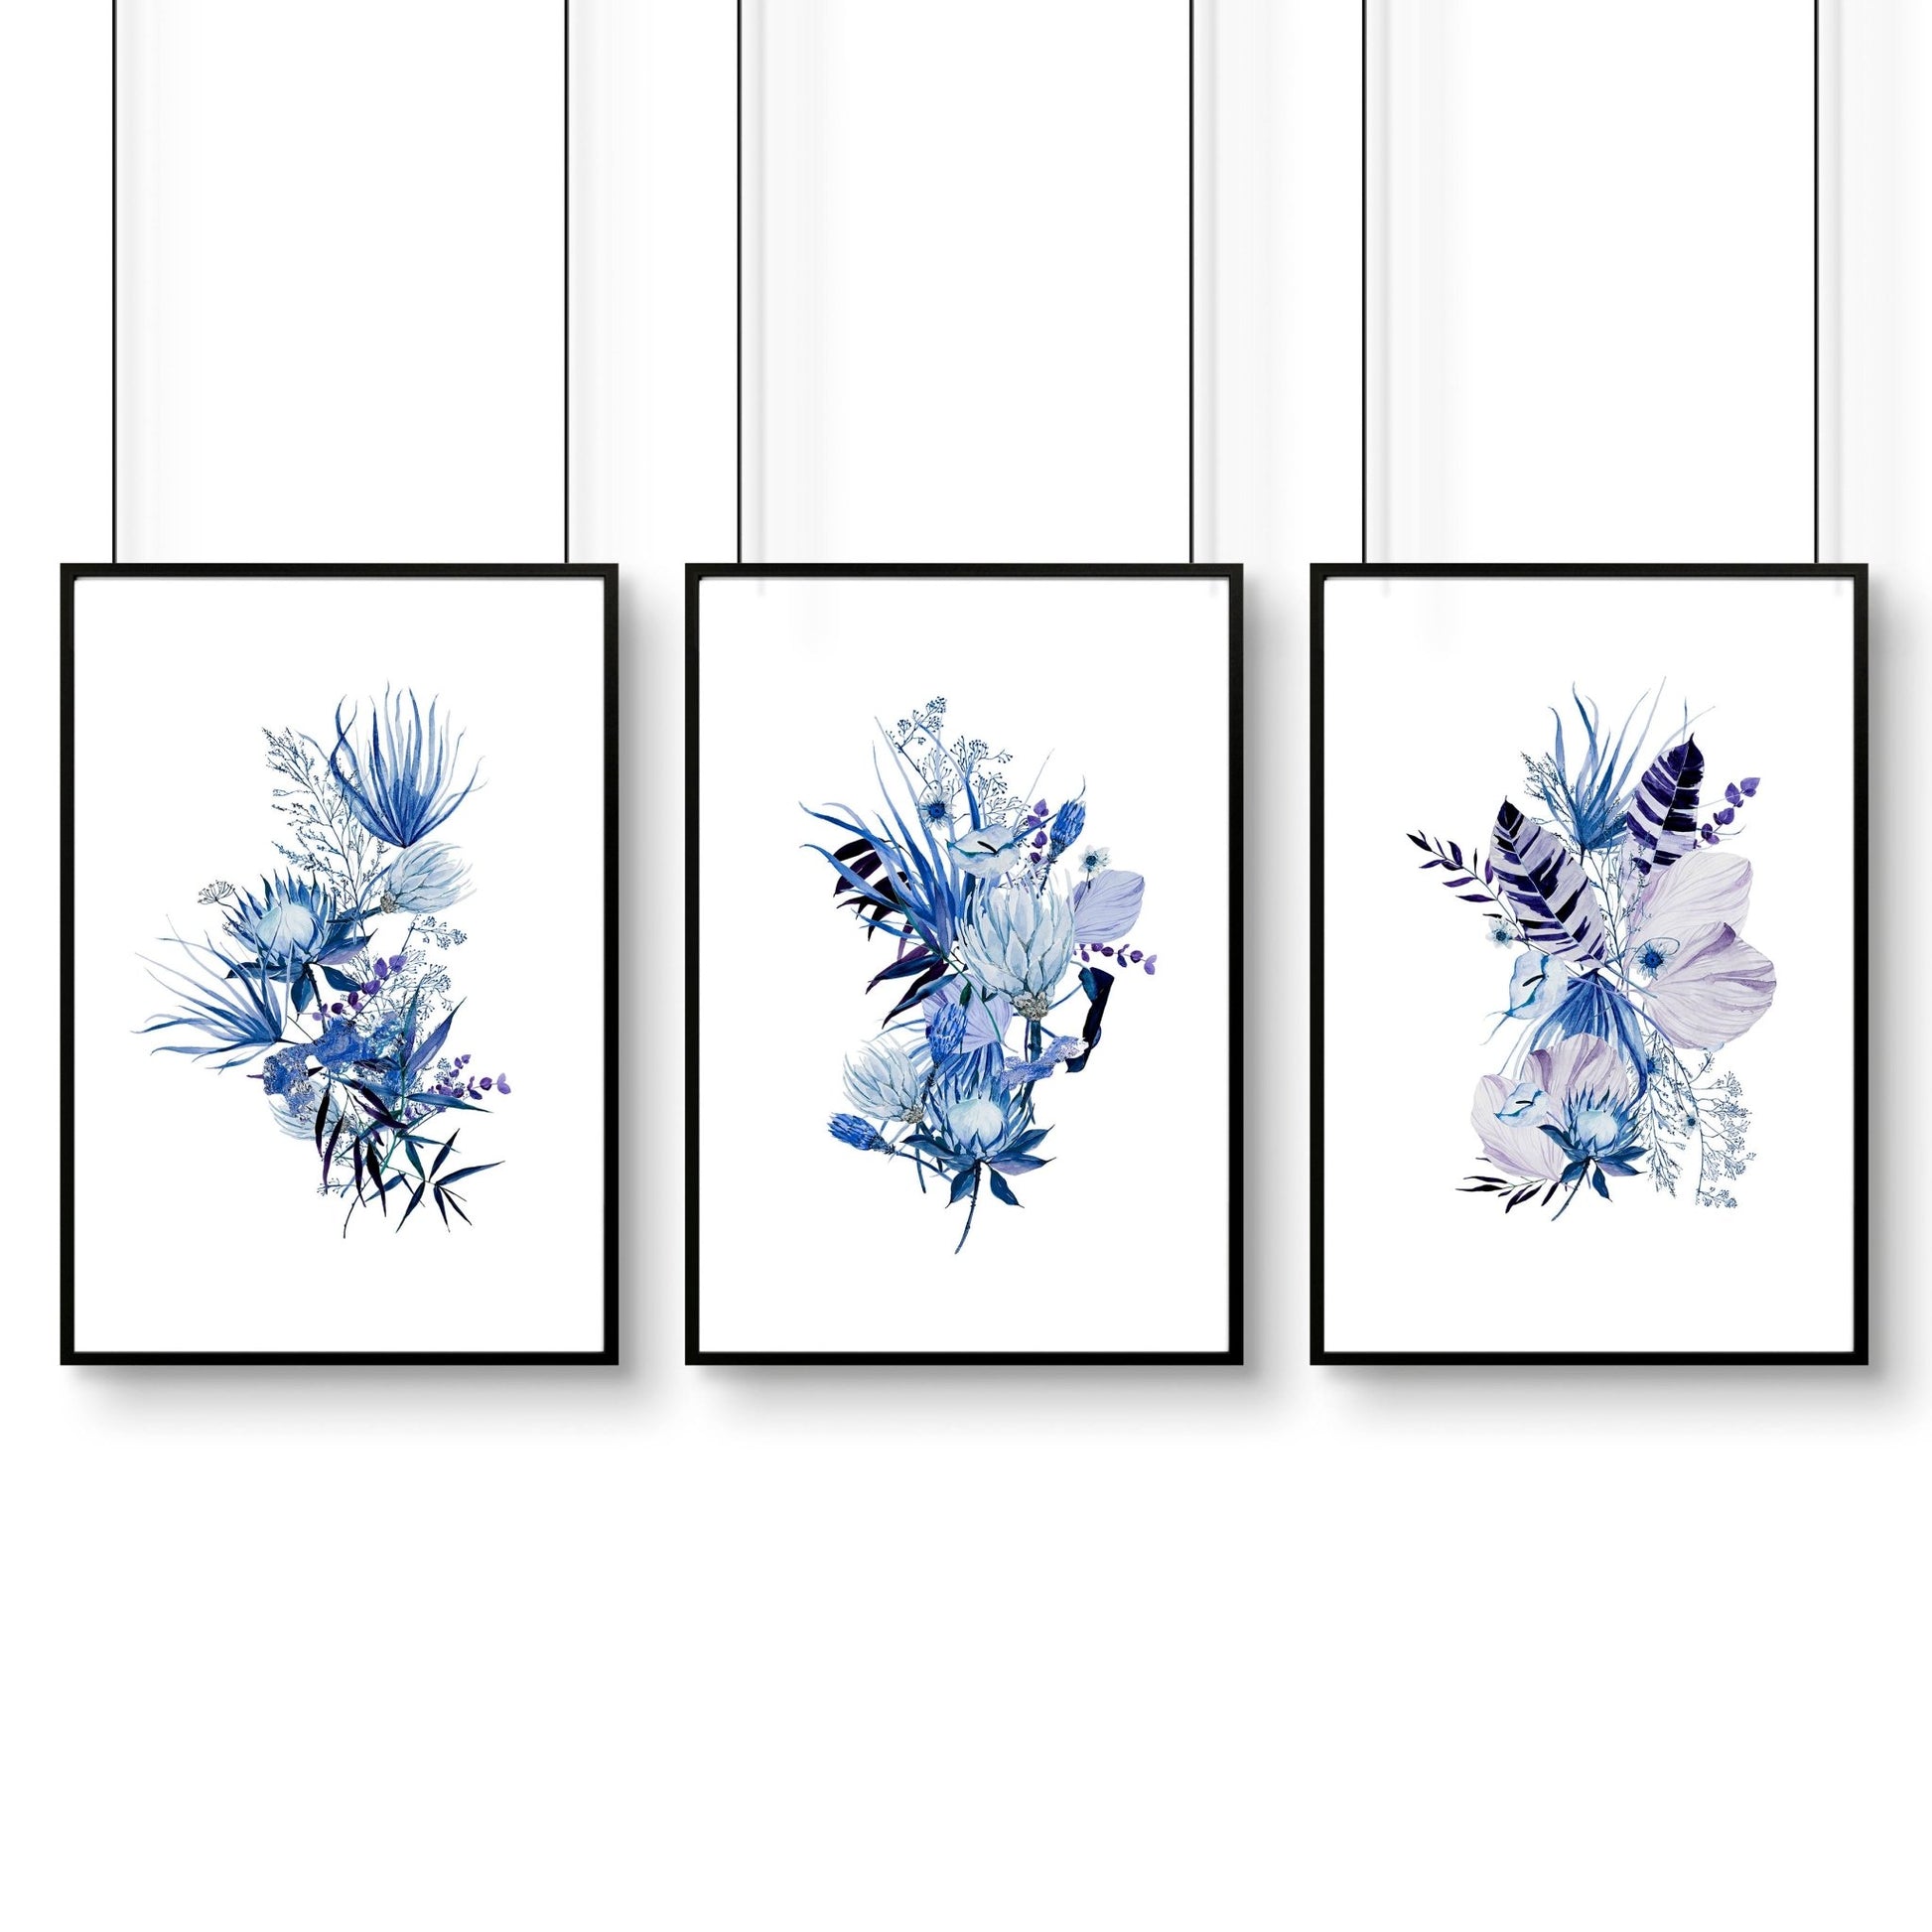 Pictures for home office | set of 3 wall art prints - About Wall Art